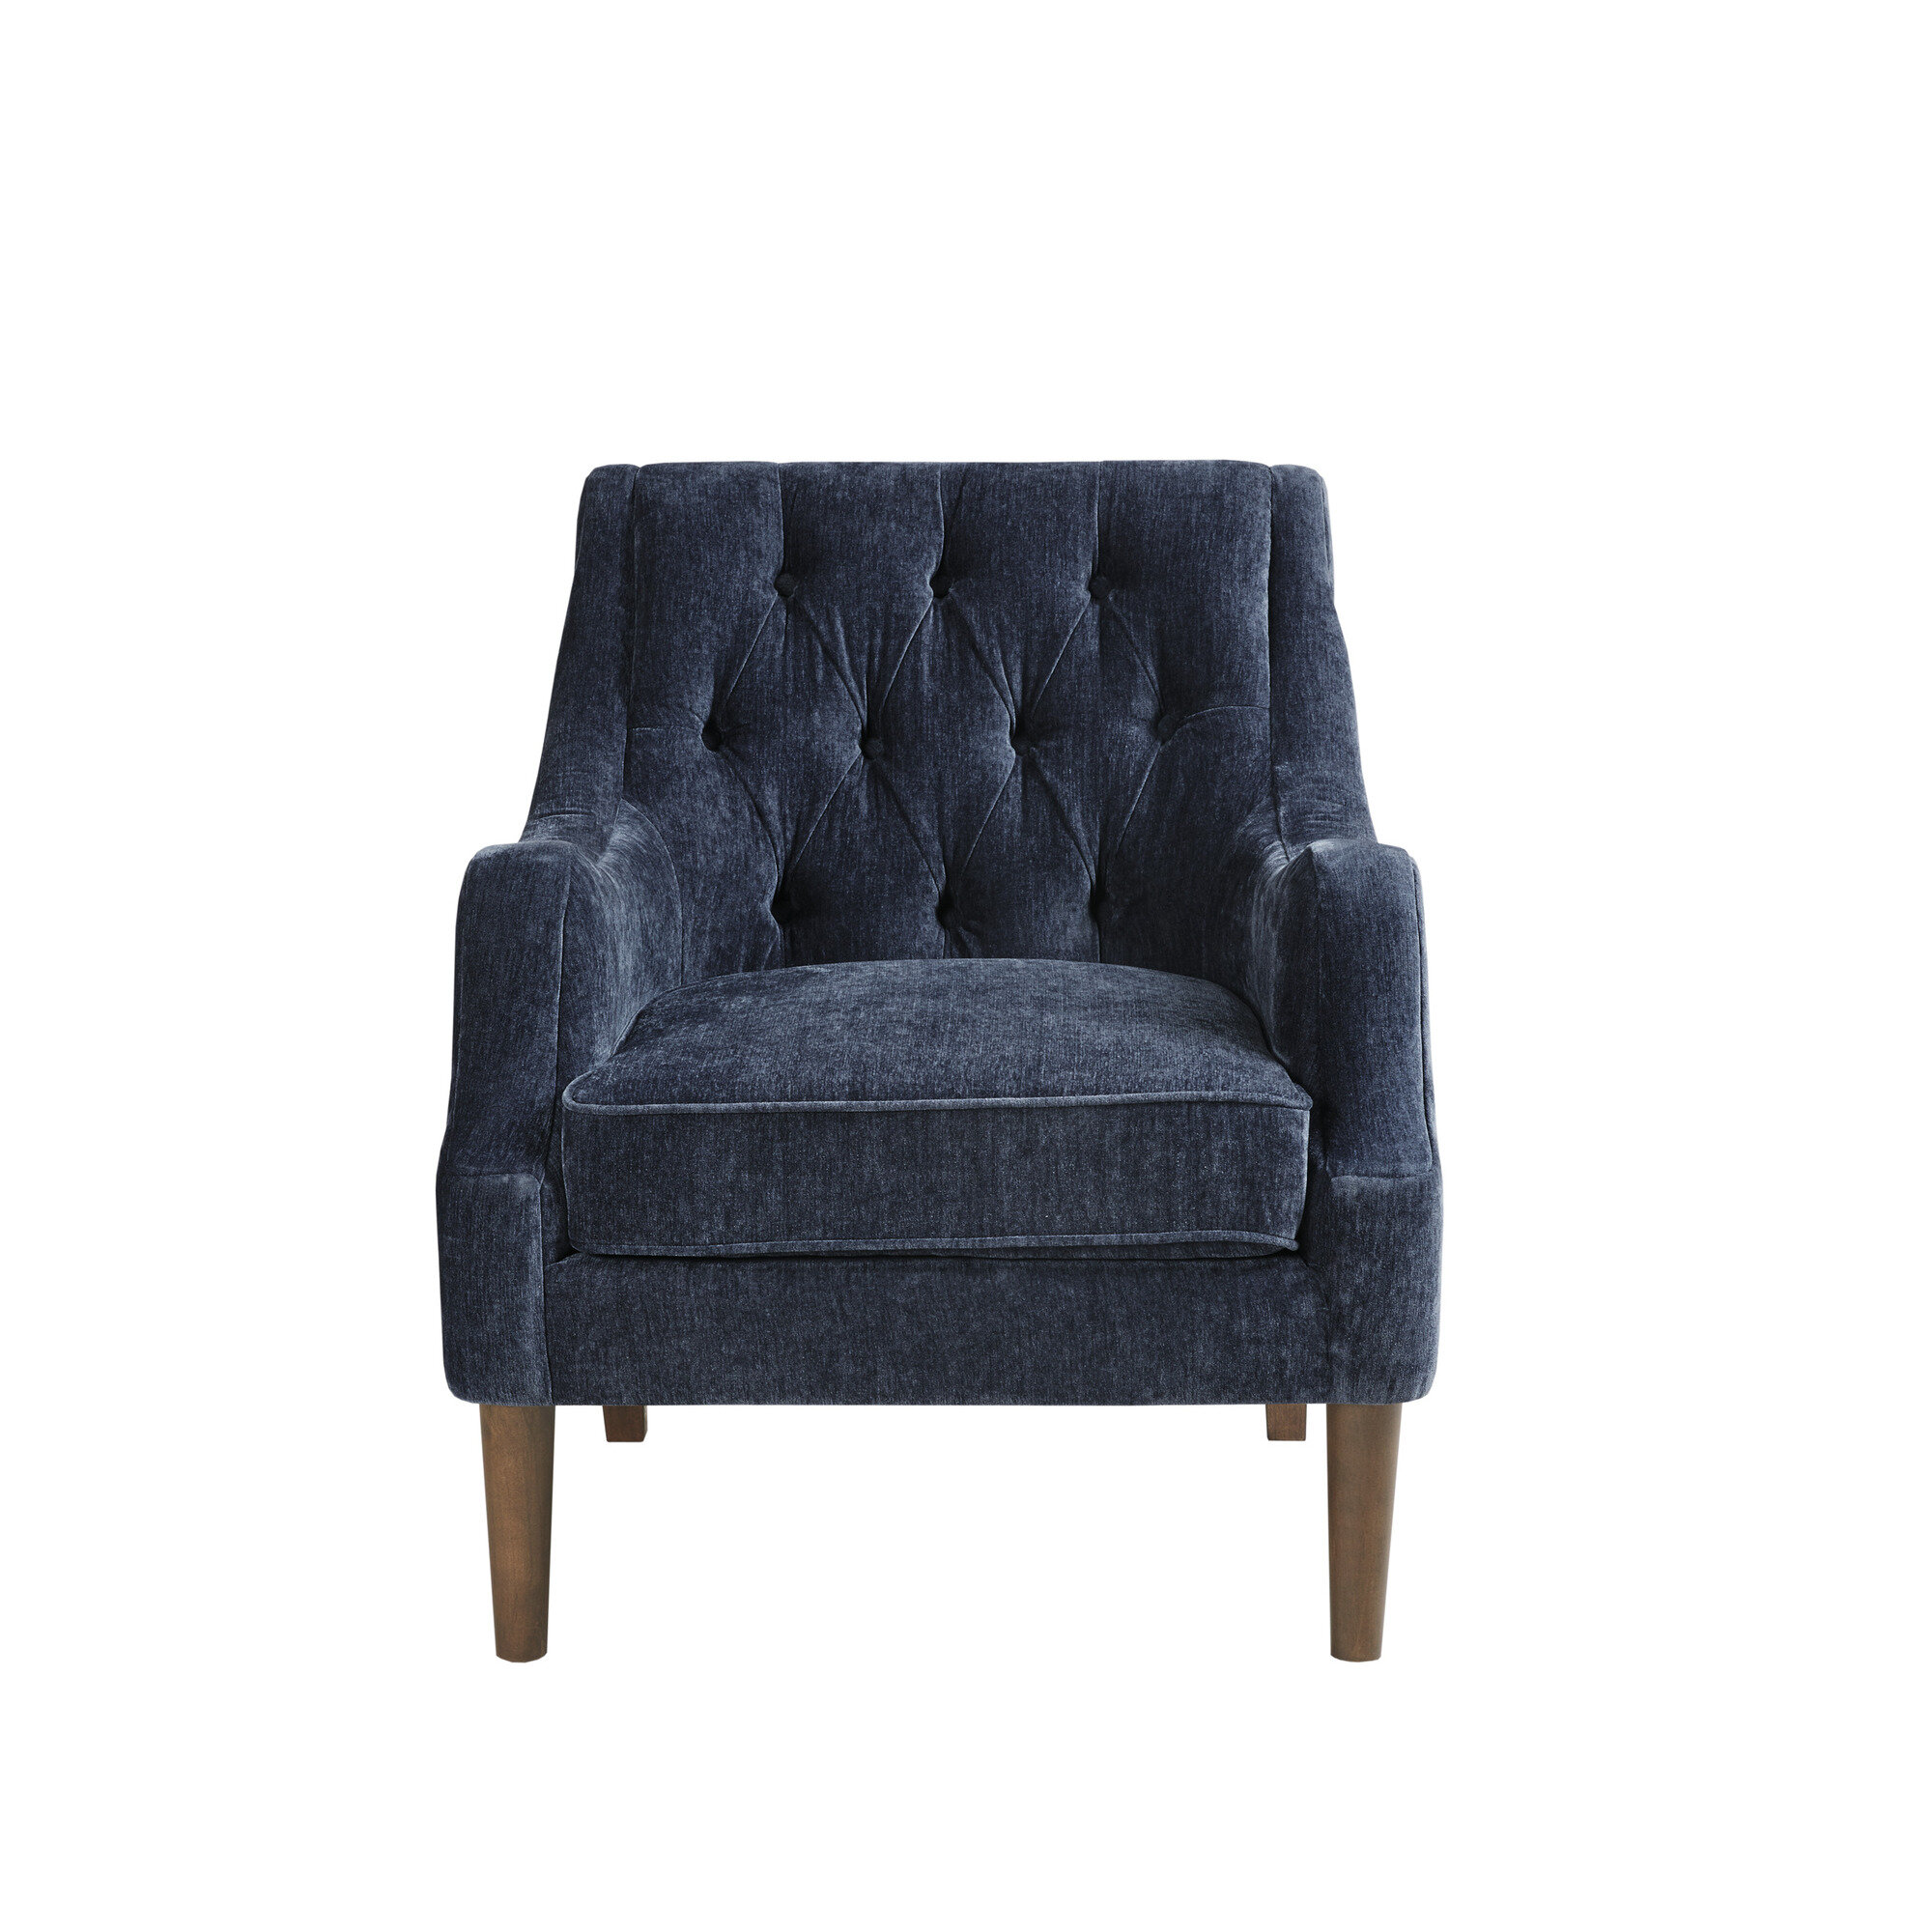 Galesville 29.25” Wide Tufted Wingback Chair